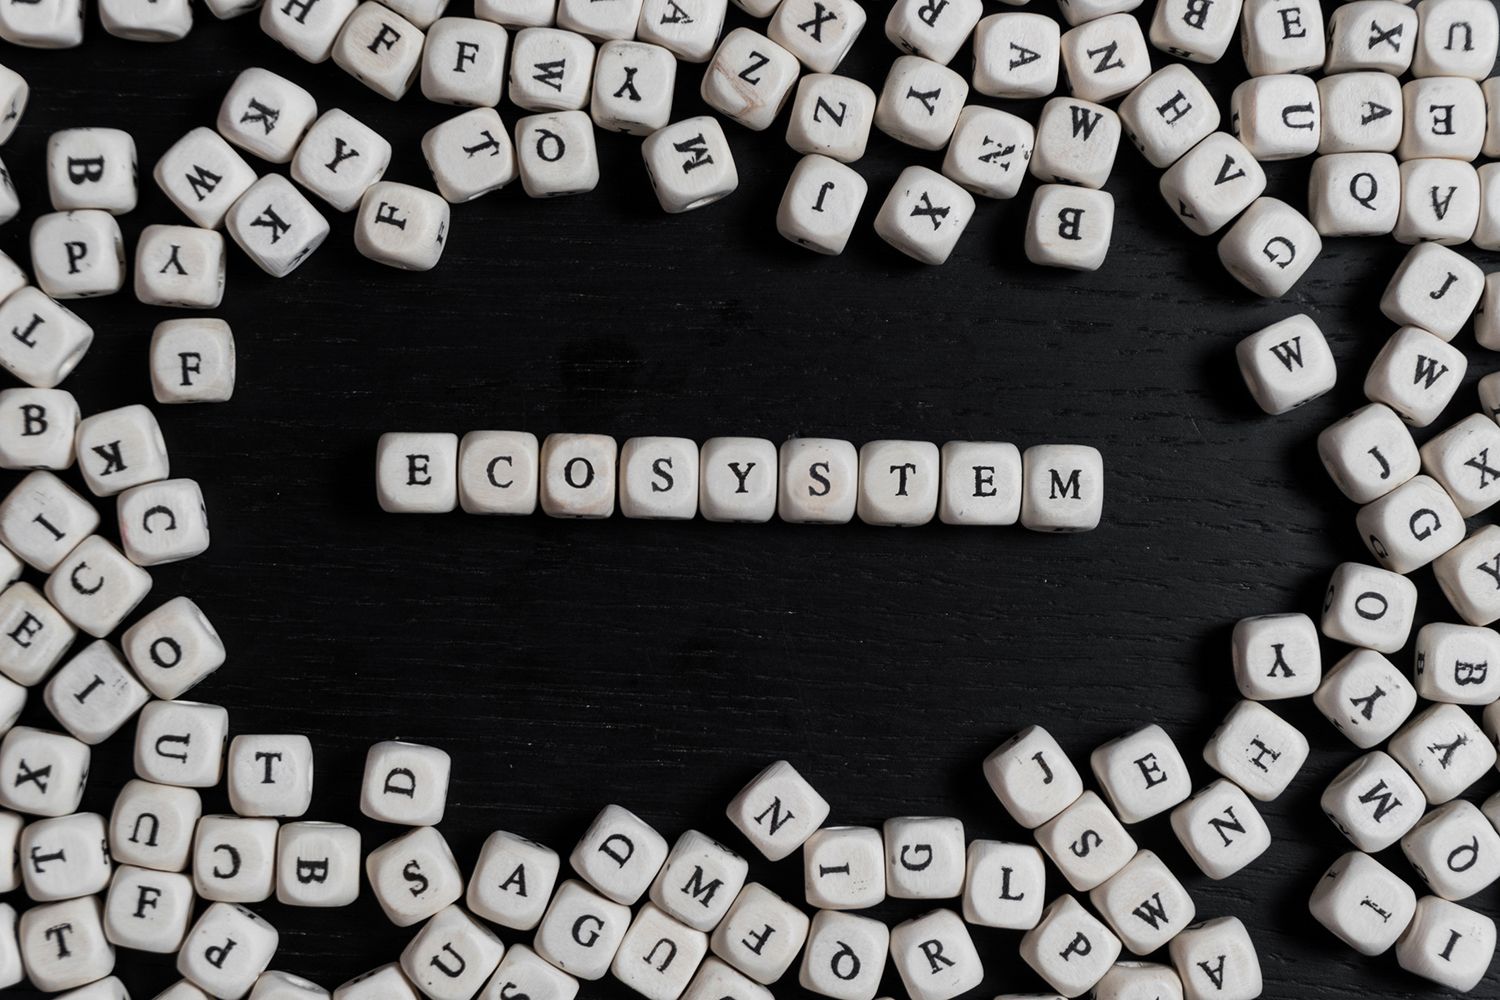 Ecosystem is more than just a buzzword